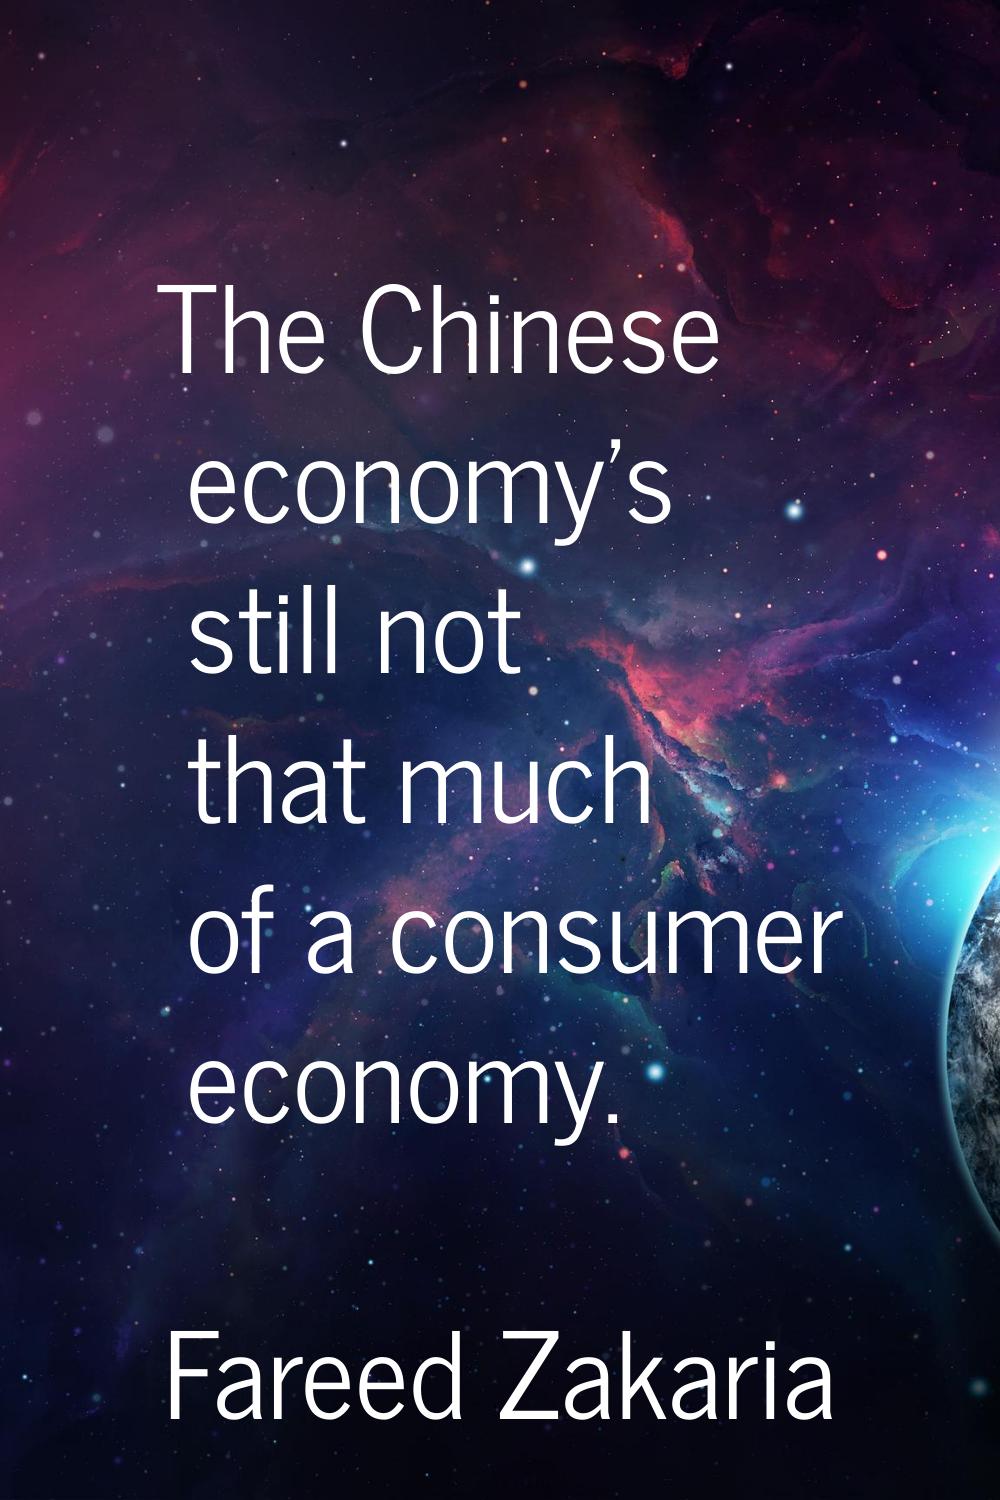 The Chinese economy's still not that much of a consumer economy.